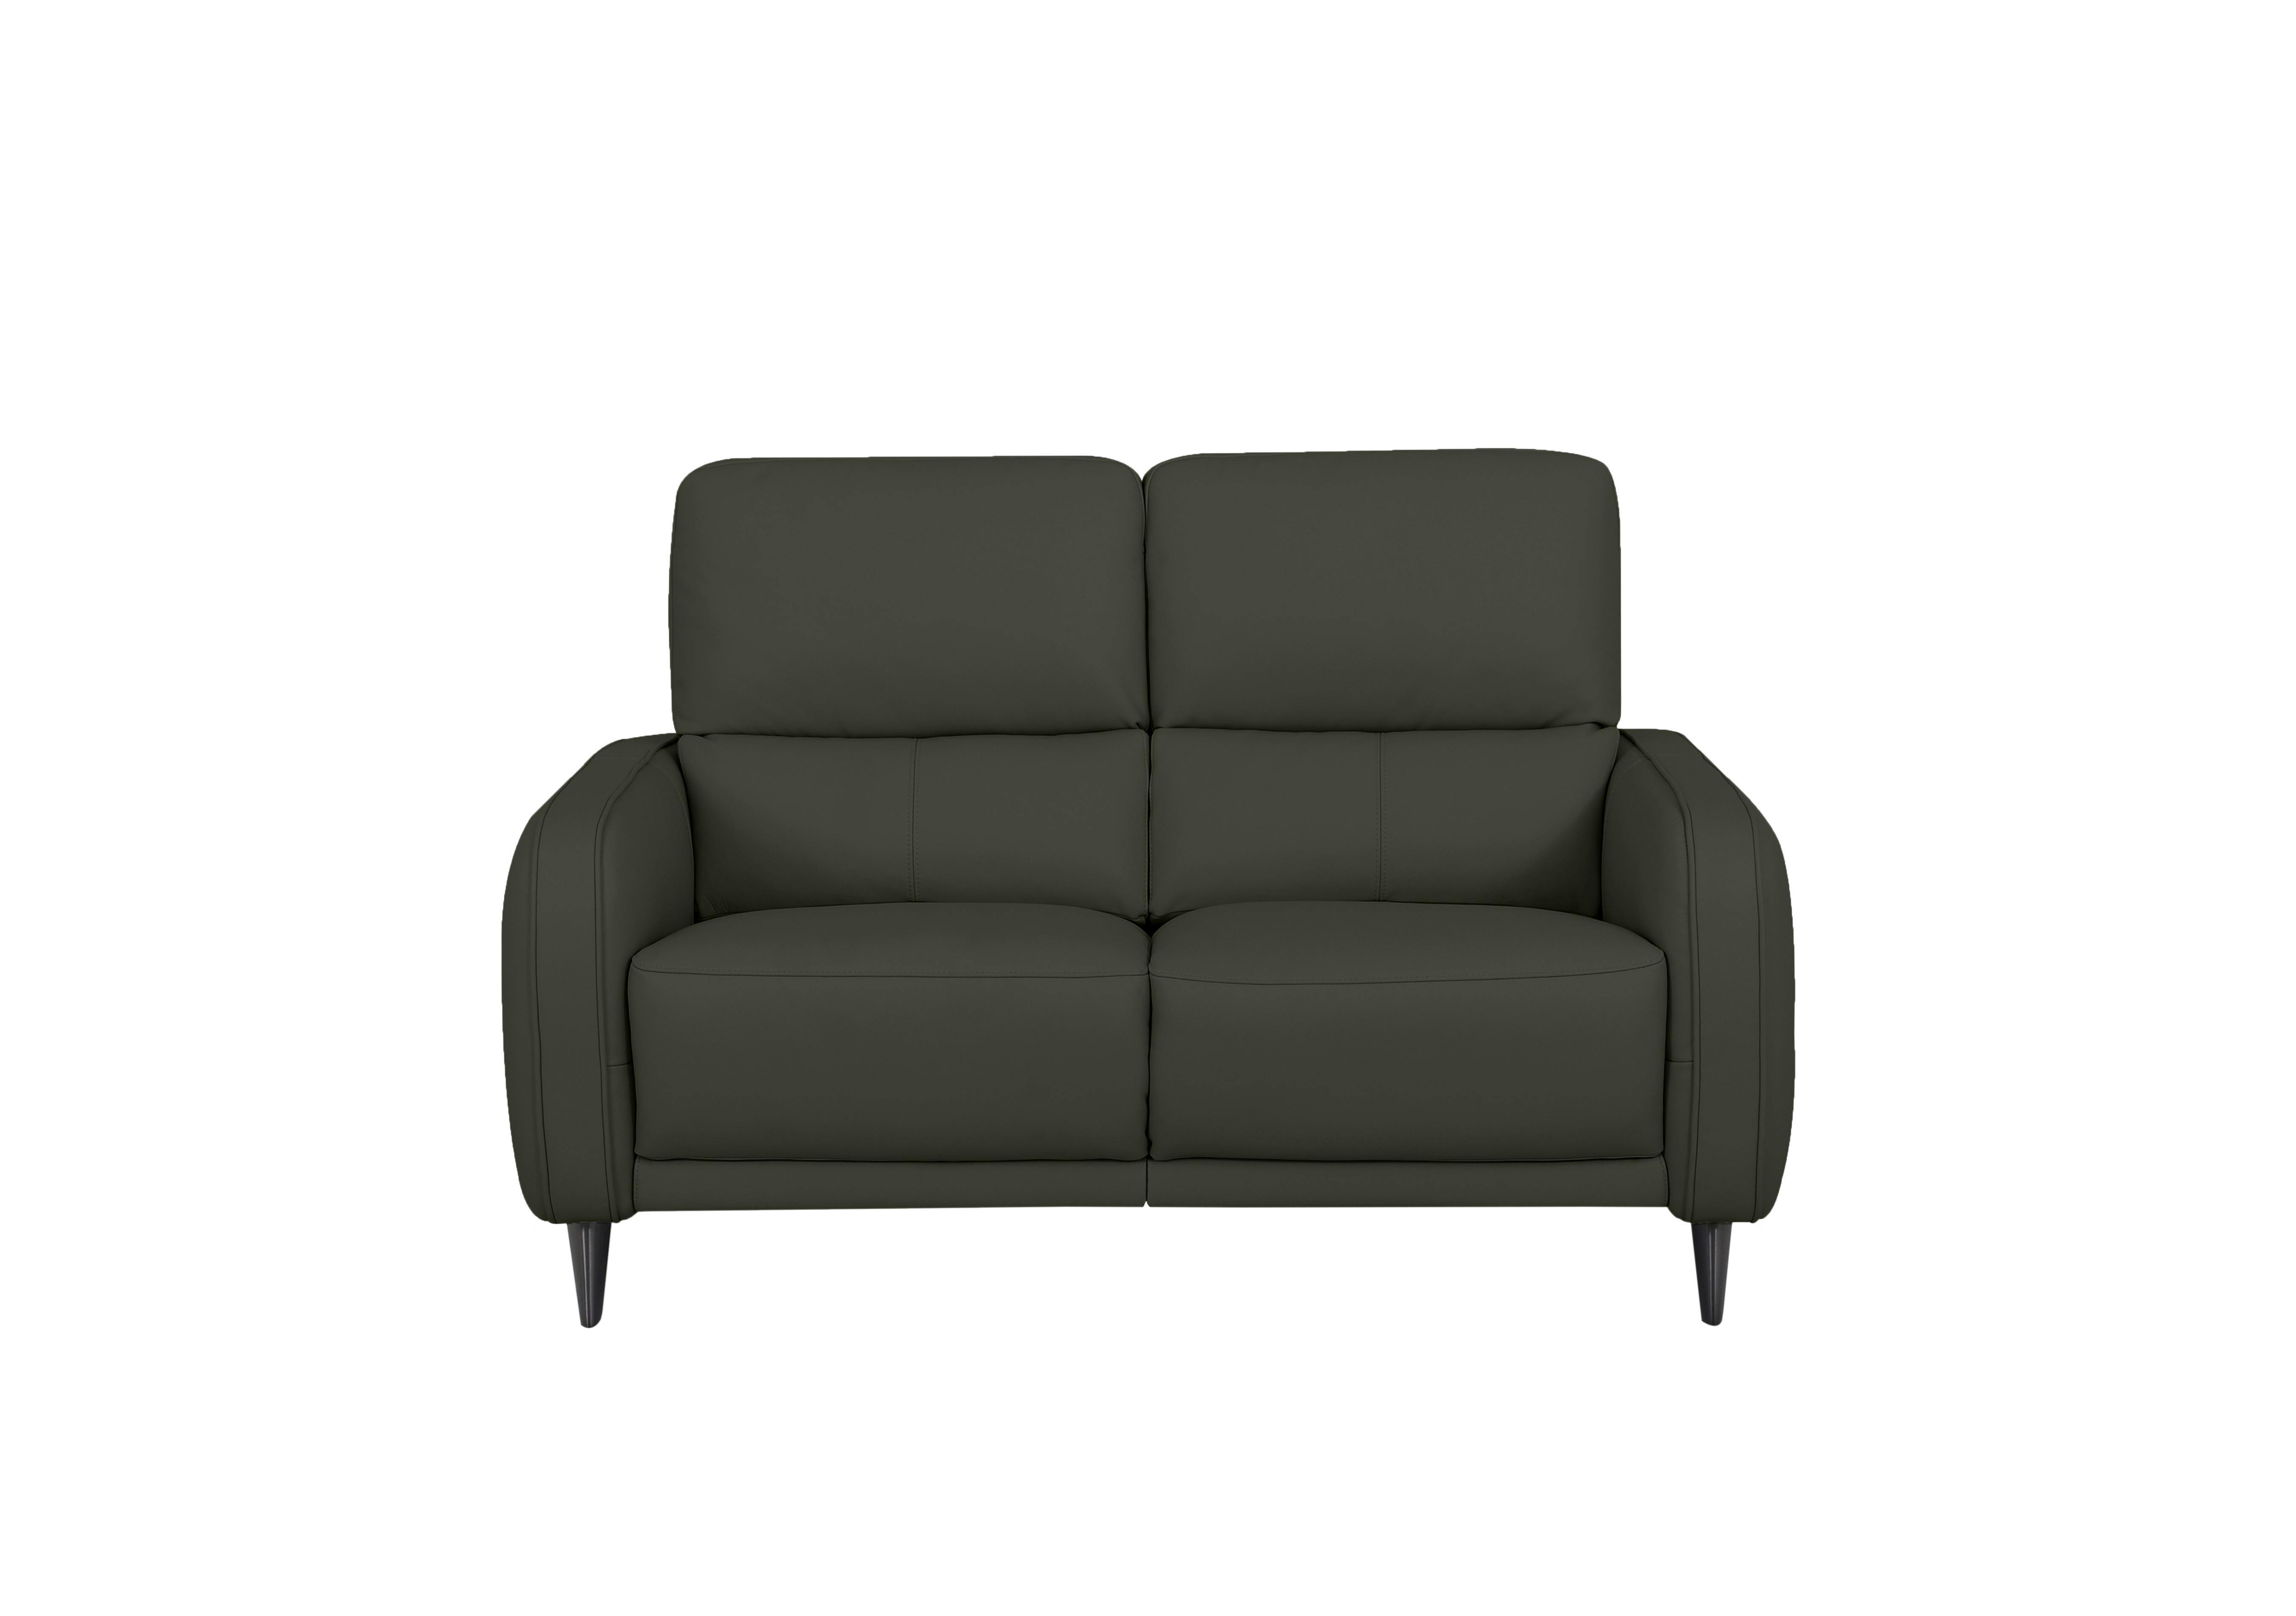 Logan 2 Seater Leather Sofa in Nn-570e Olive Green on Furniture Village